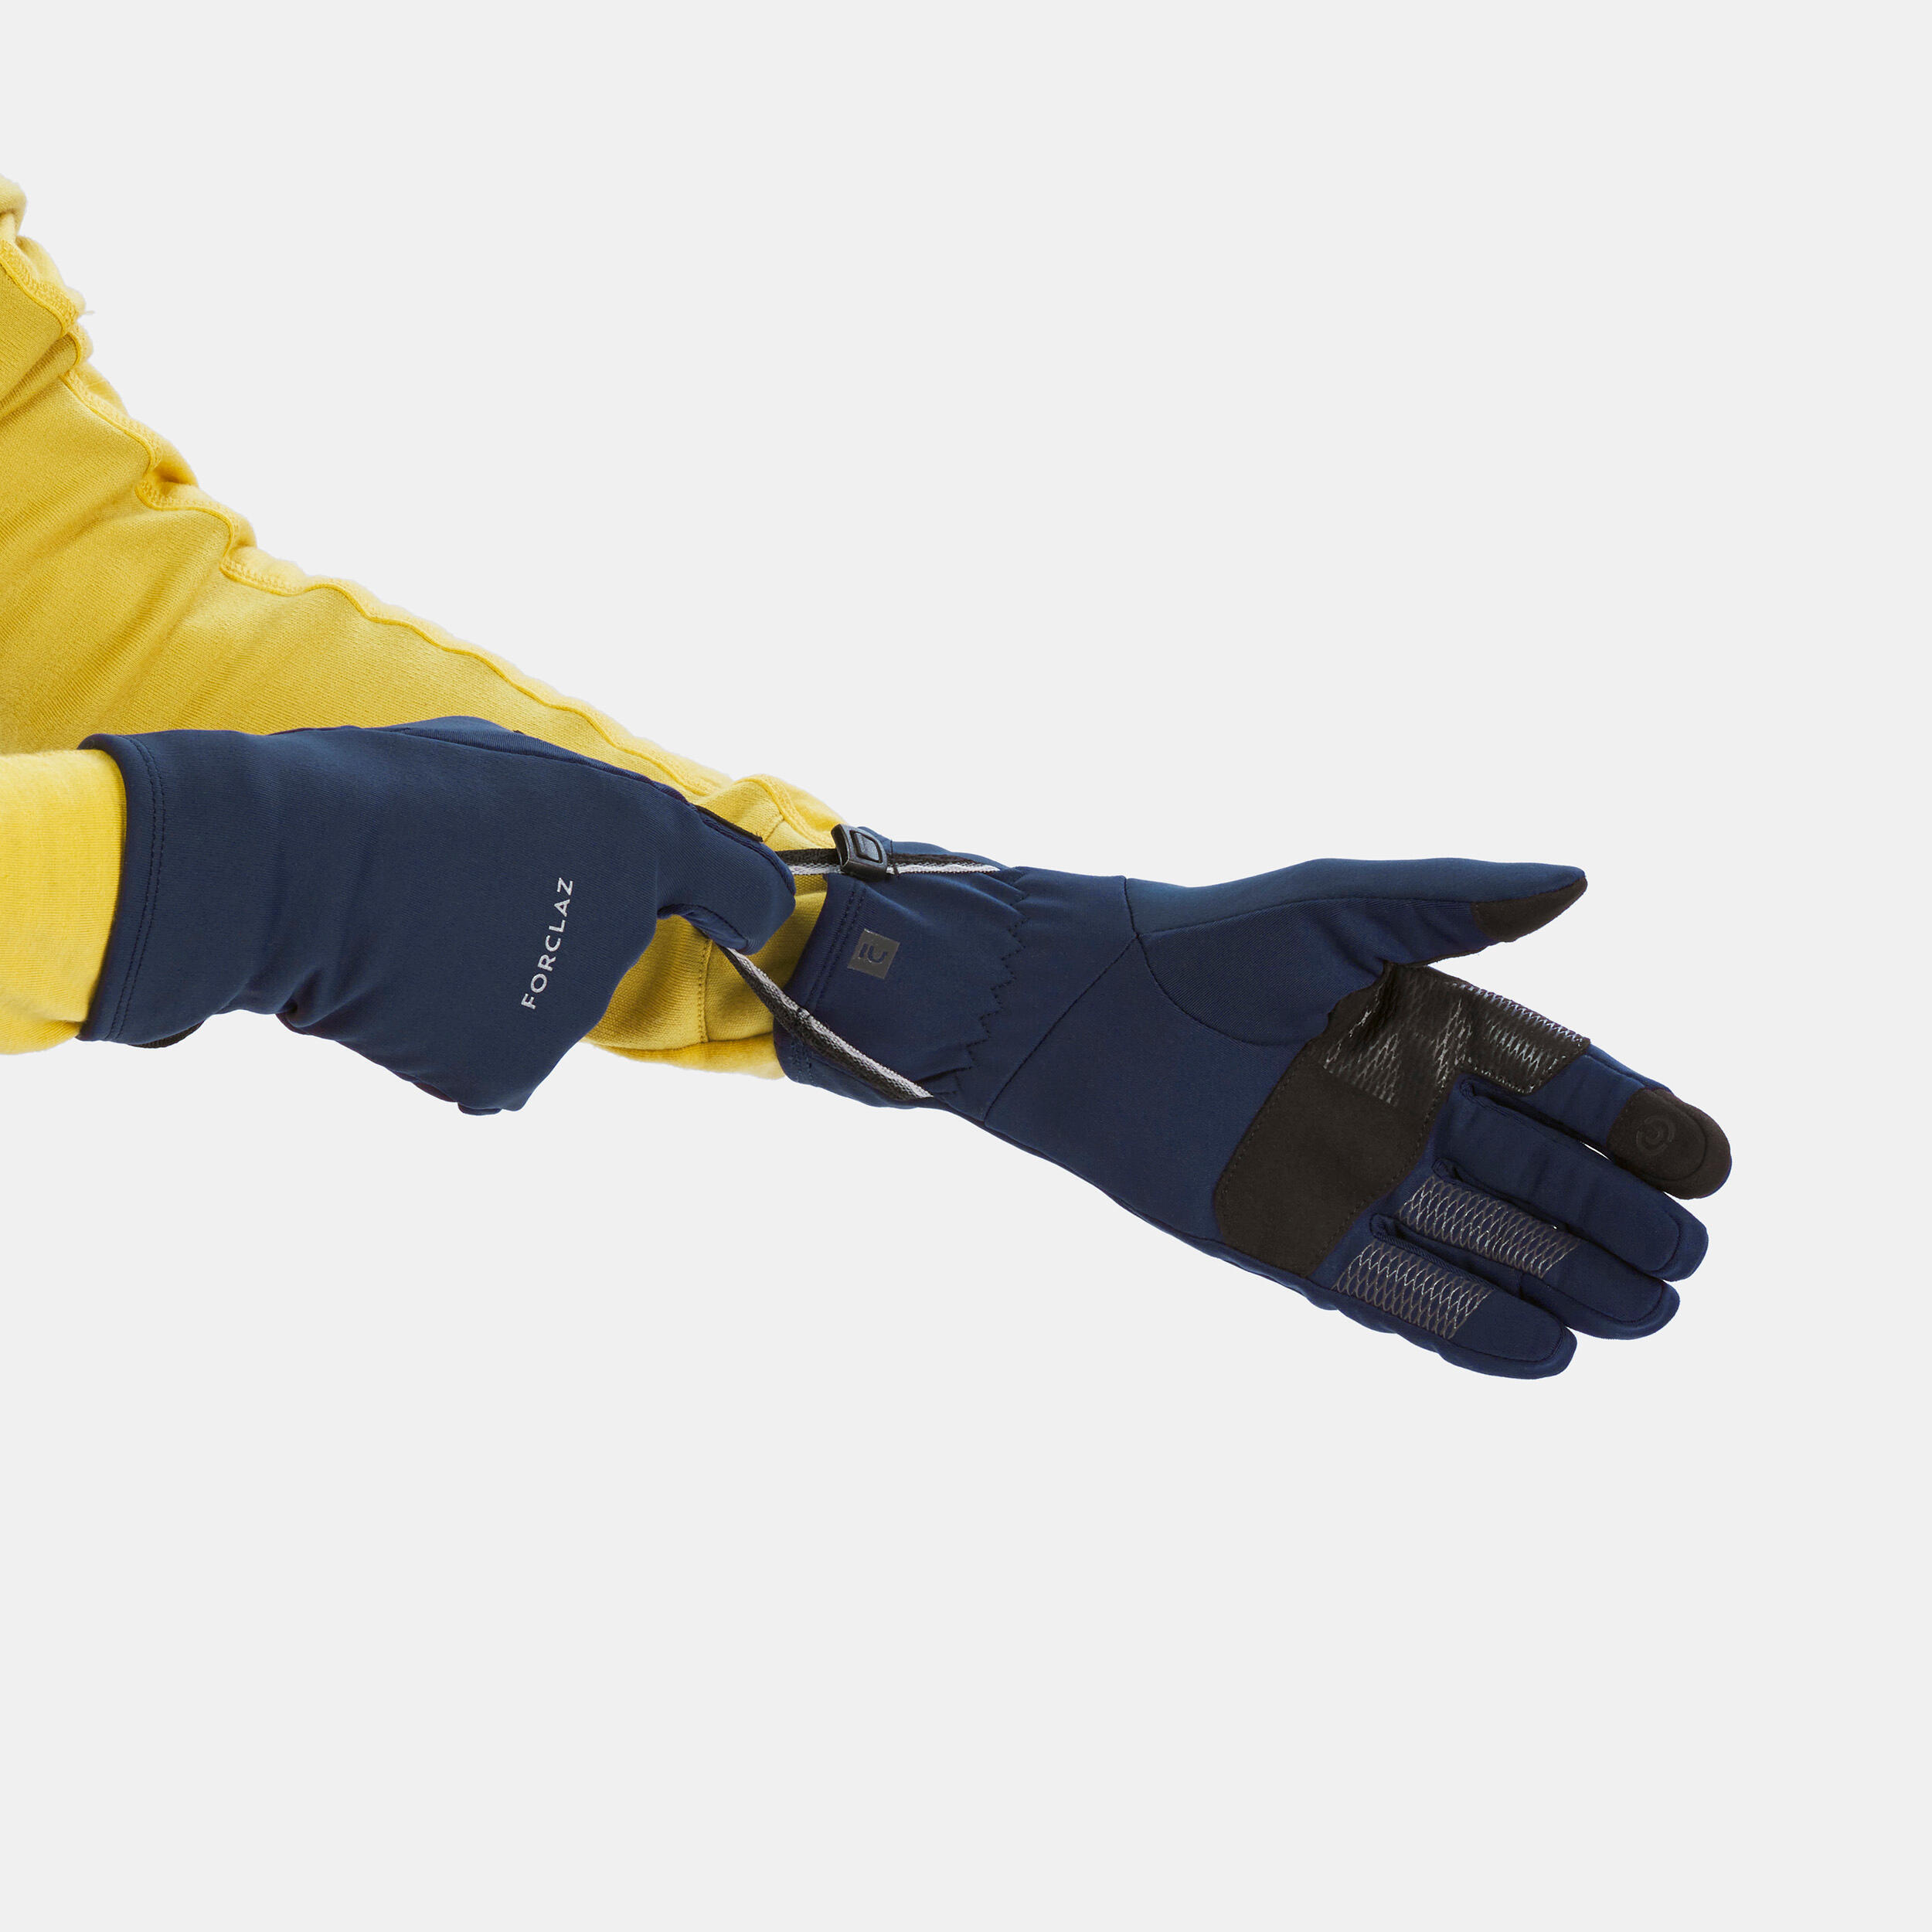 Adult mountain trekking tactile stretch gloves - MT500 navy blue 6/9